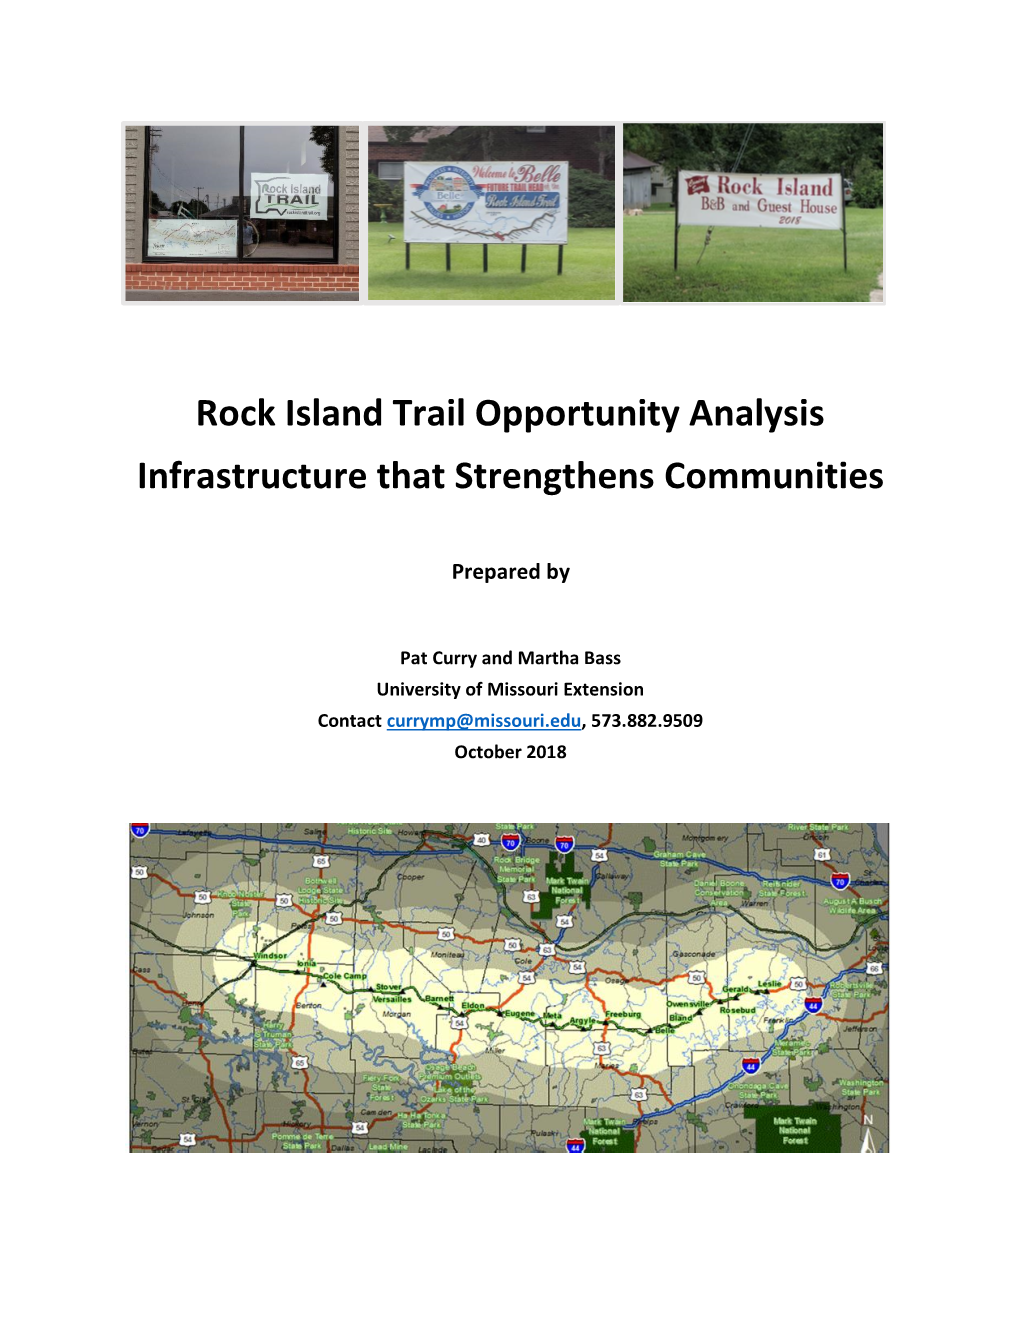 Rock Island Trail Opportunity Analysis Infrastructure That Strengthens Communities